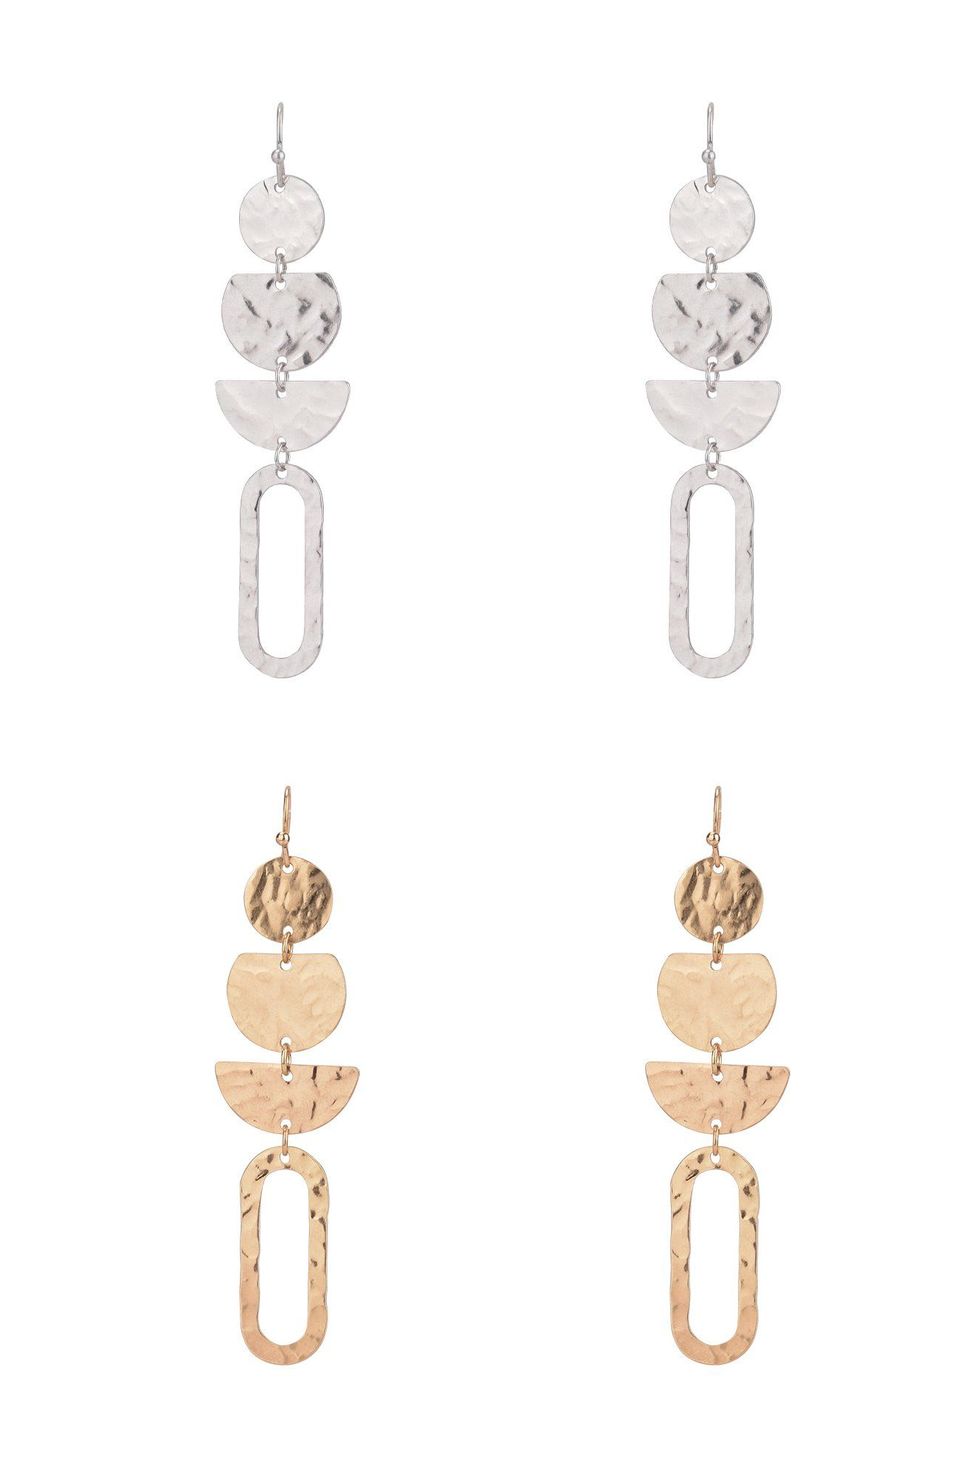 The Pioneer Woman Jewelry, Soft Silver-tone and Soft Gold-tone Metal Drop Duo Earring Set